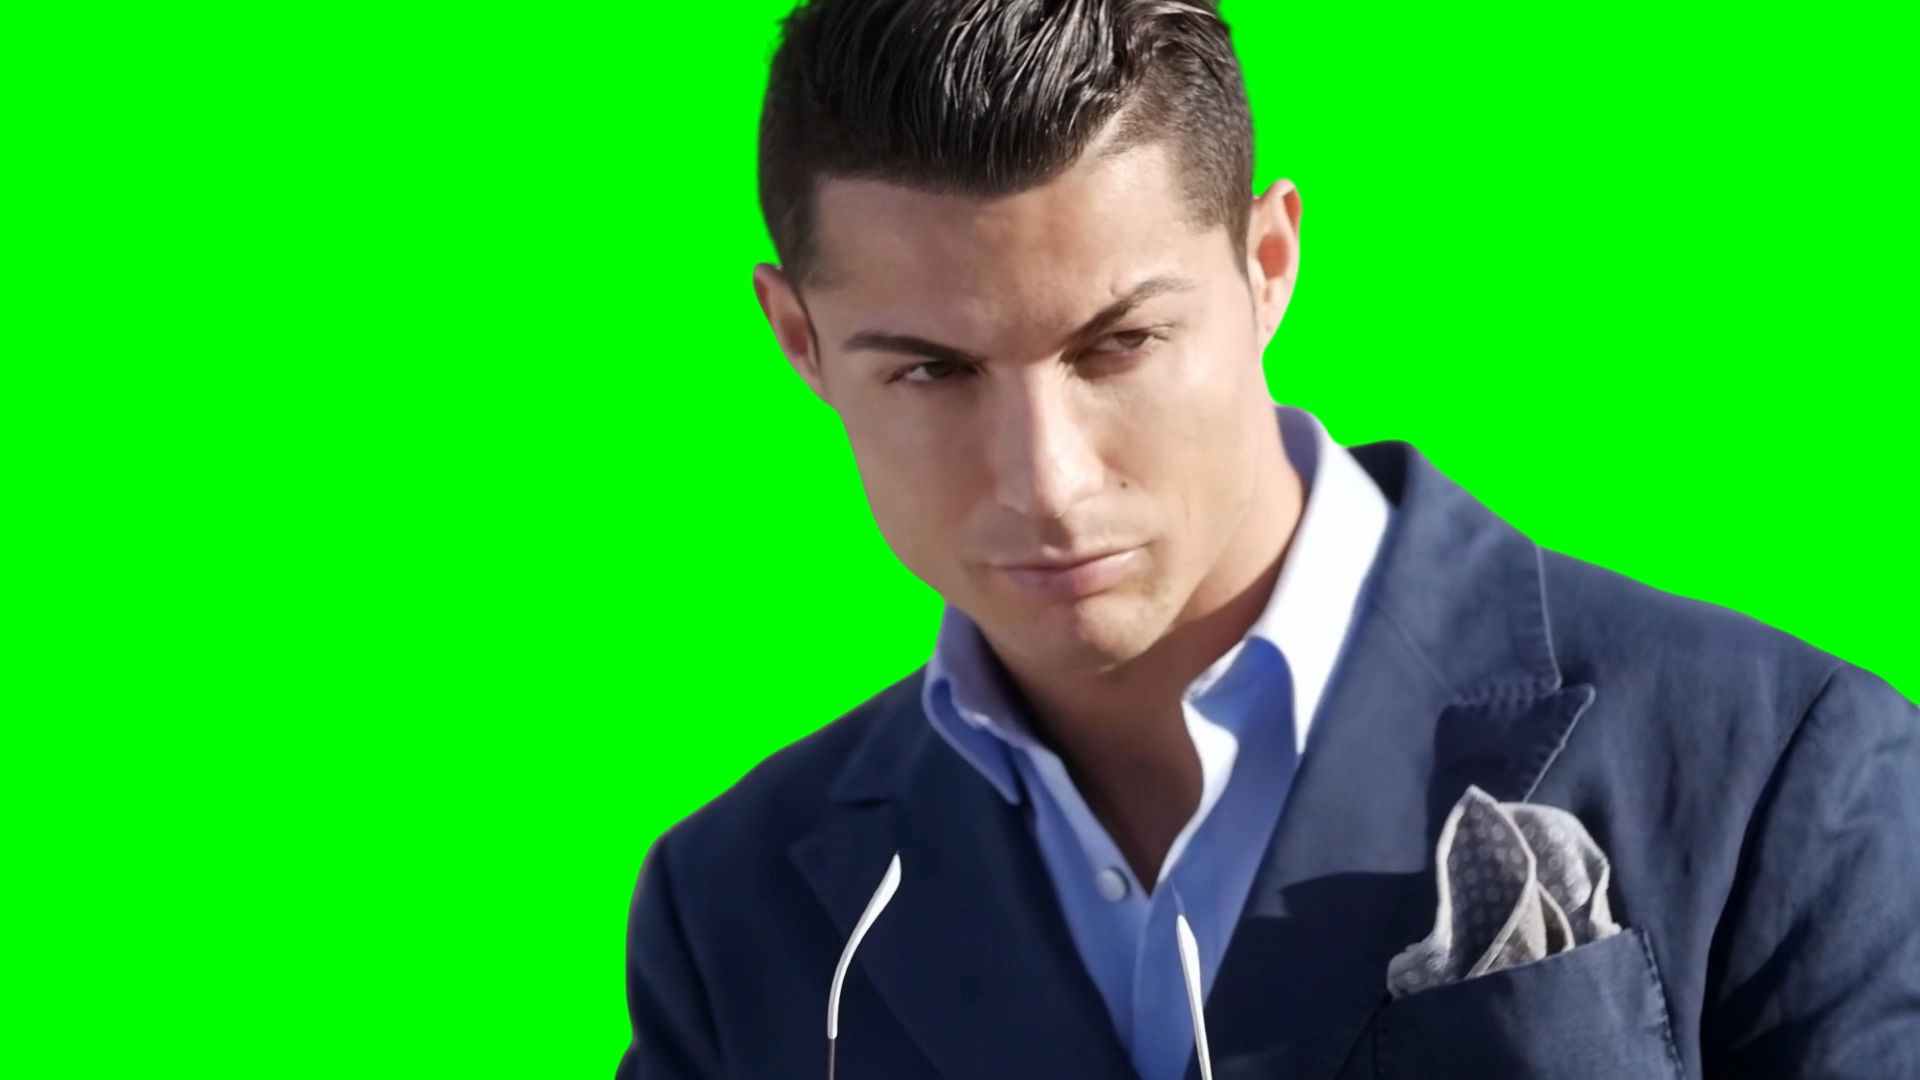 Cristiano Ronaldo wearing a suit and taking sunglasses off meme (Green Screen)